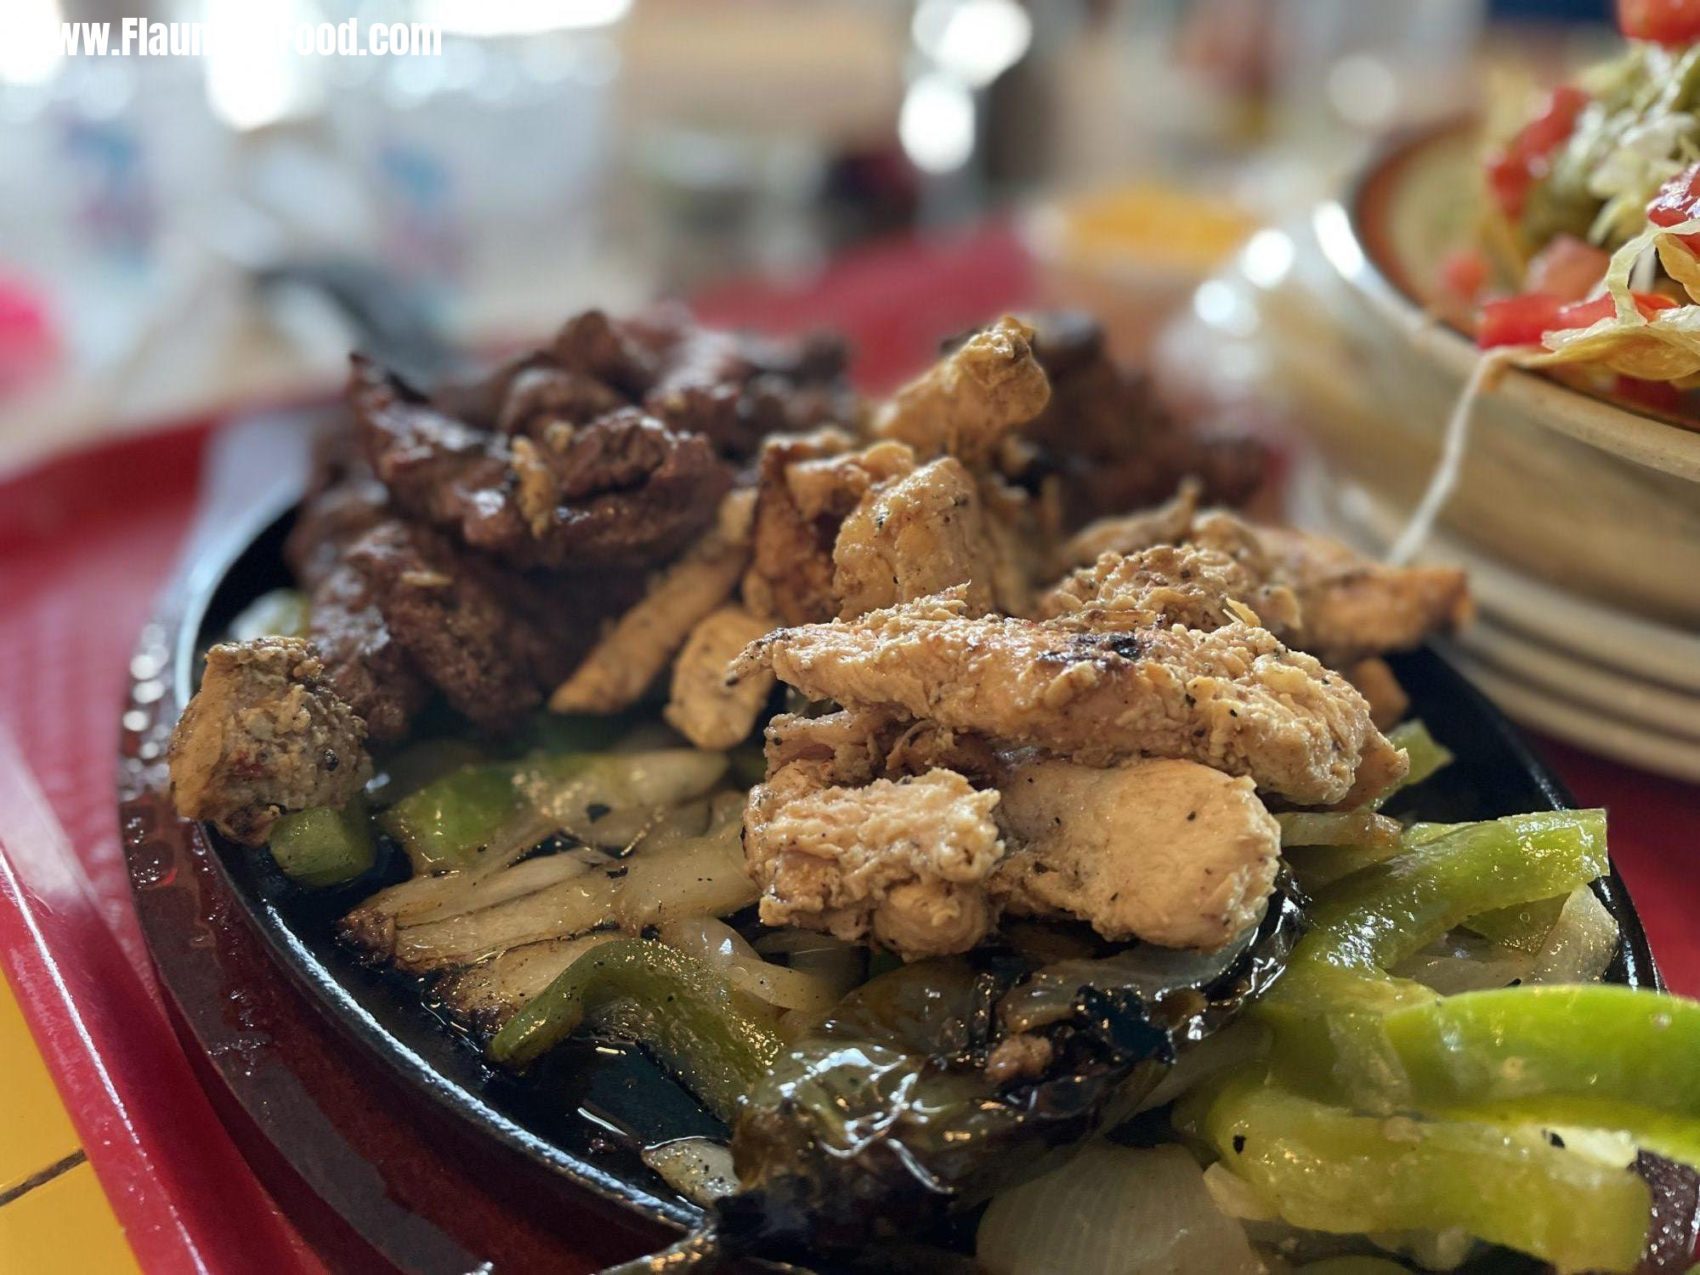 Fajita fiesta at roses café family style in southwest Fort Worth Texas